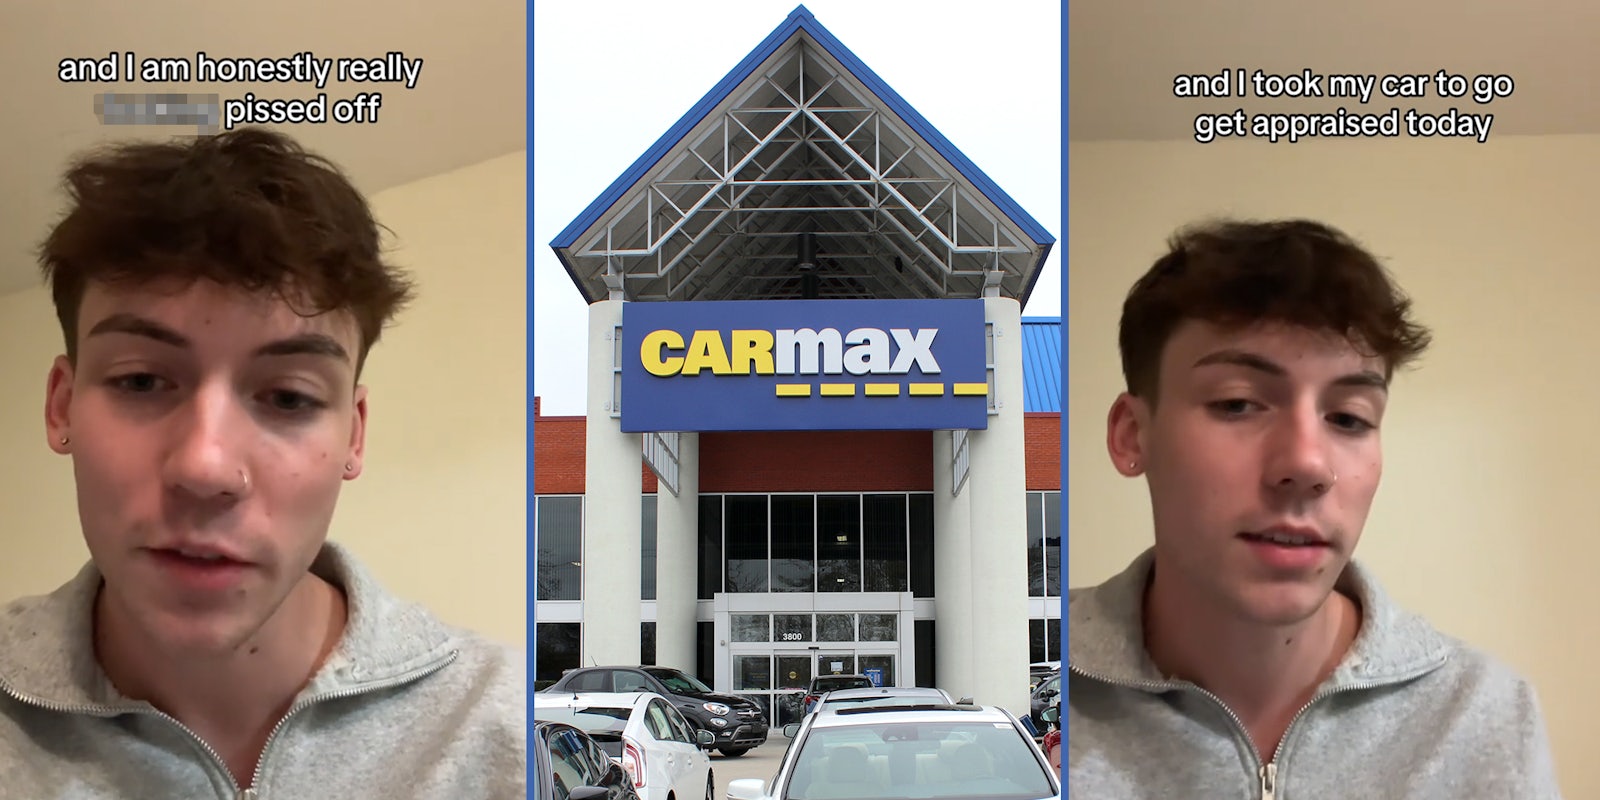 Customer warns against CarMax after learning it lied about his car’s accident history